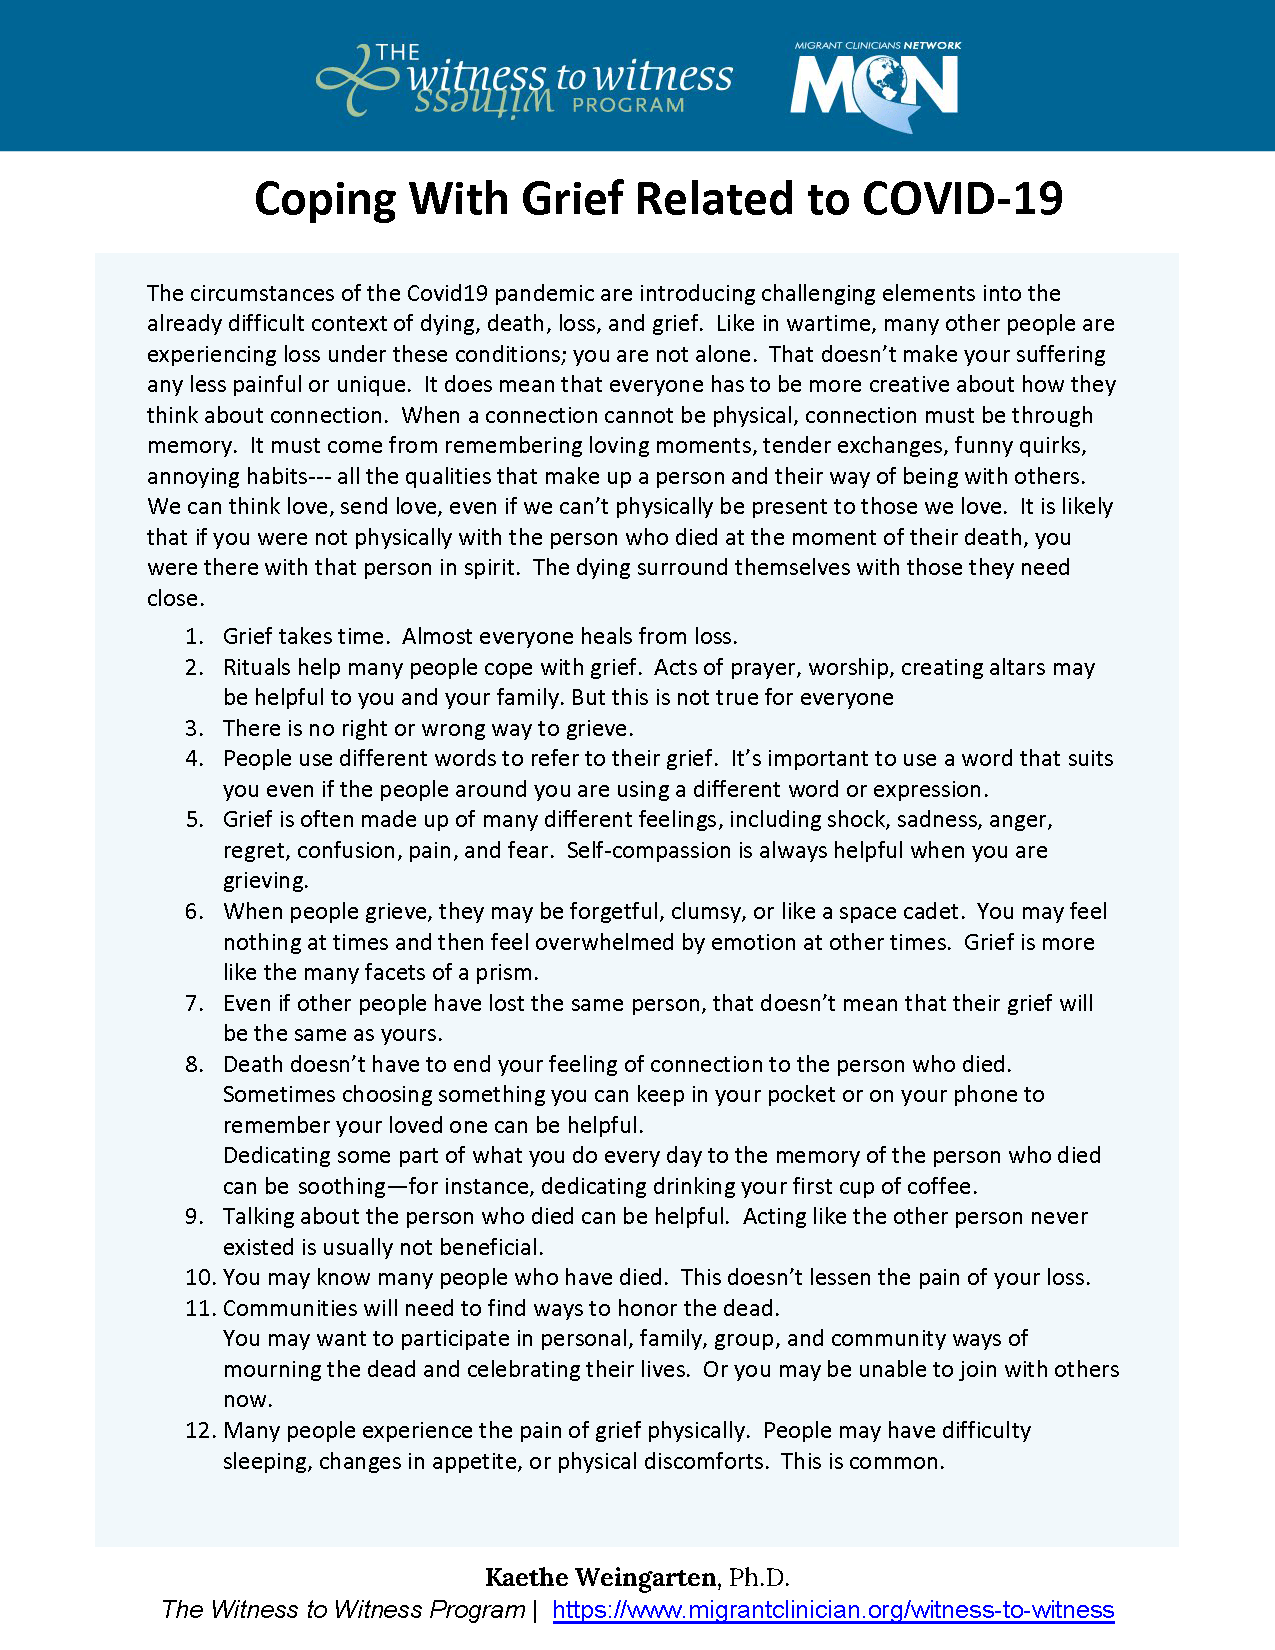 Coping with Grief Related to COVID-19